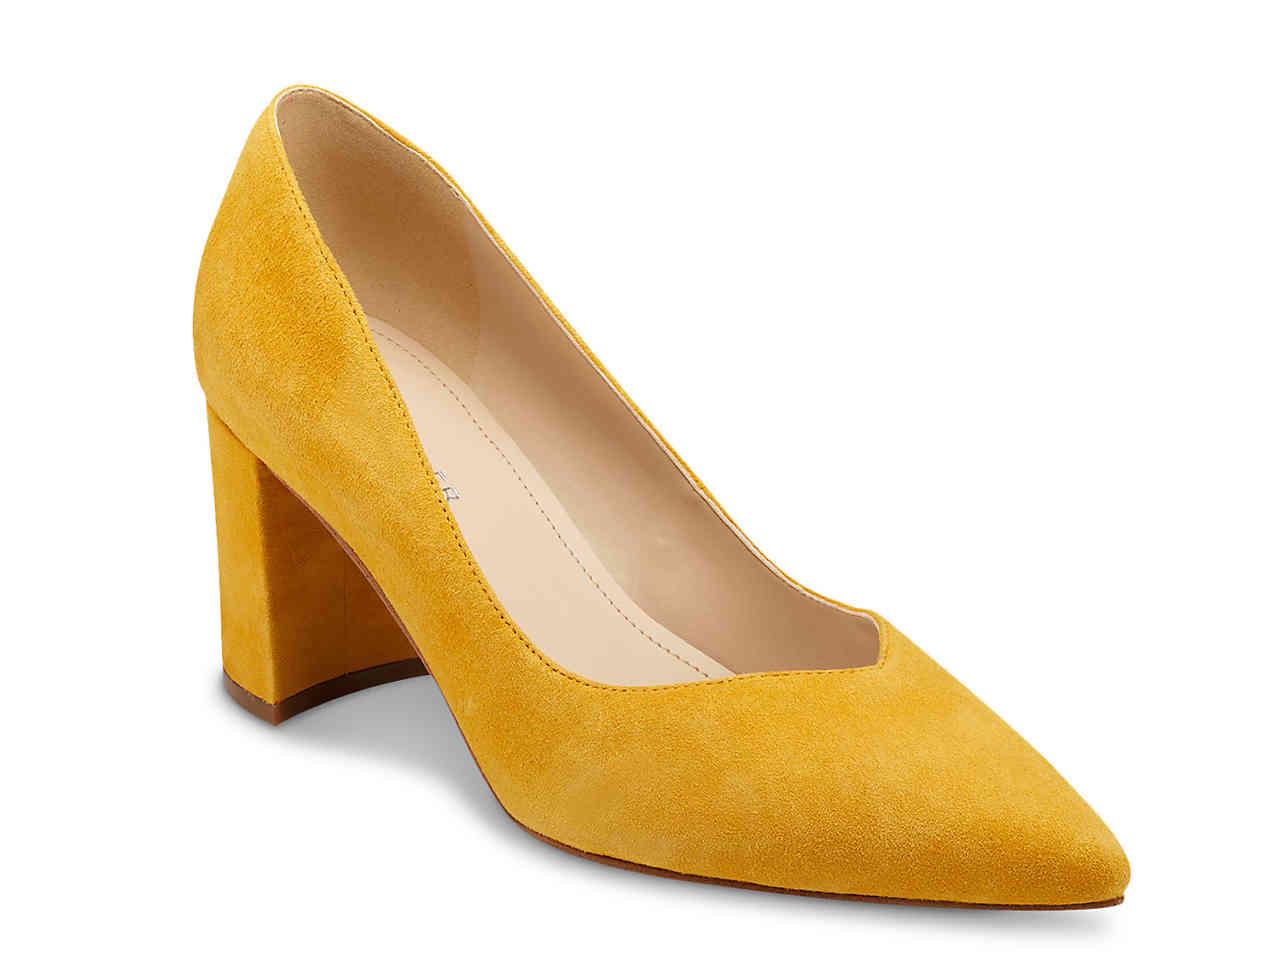 Marc Fisher Caitlin Pump in Yellow Suede (Yellow) - Lyst